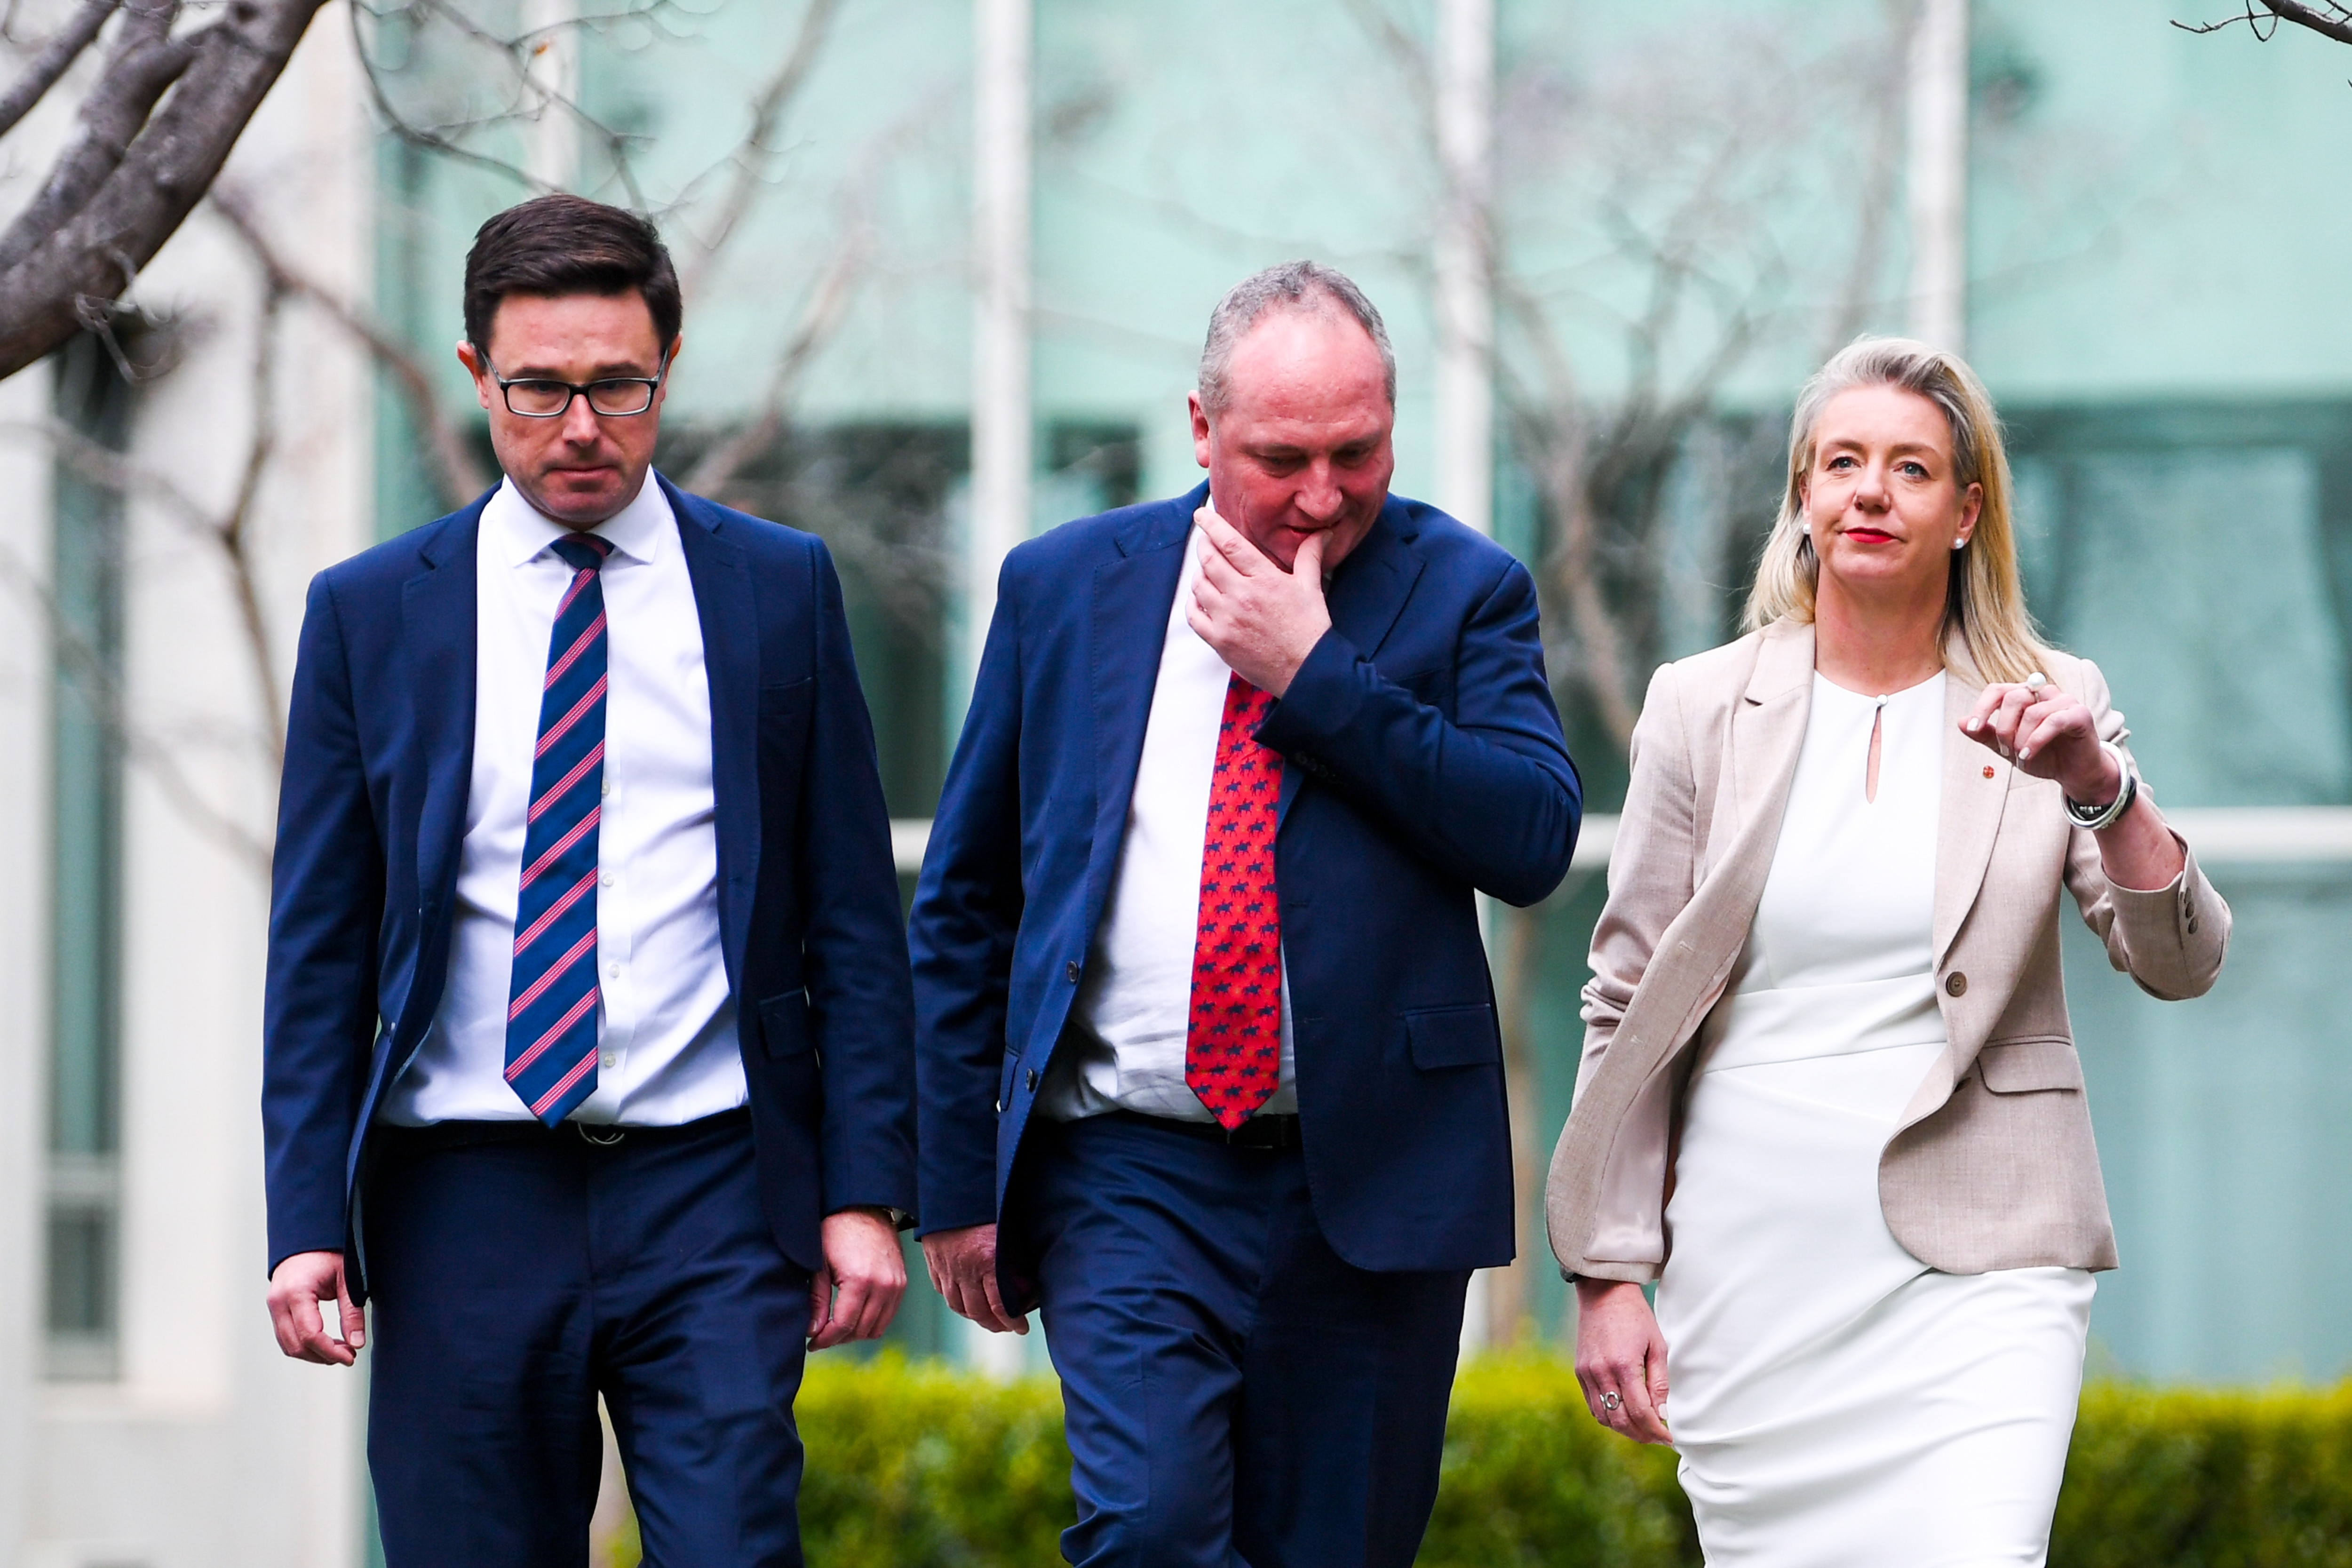 Newly-elected Nationals Leader Barnaby Joyce alongside deputy leader David Littleproud and Leader of the Nationals in the Senate Bridget McKenzie.